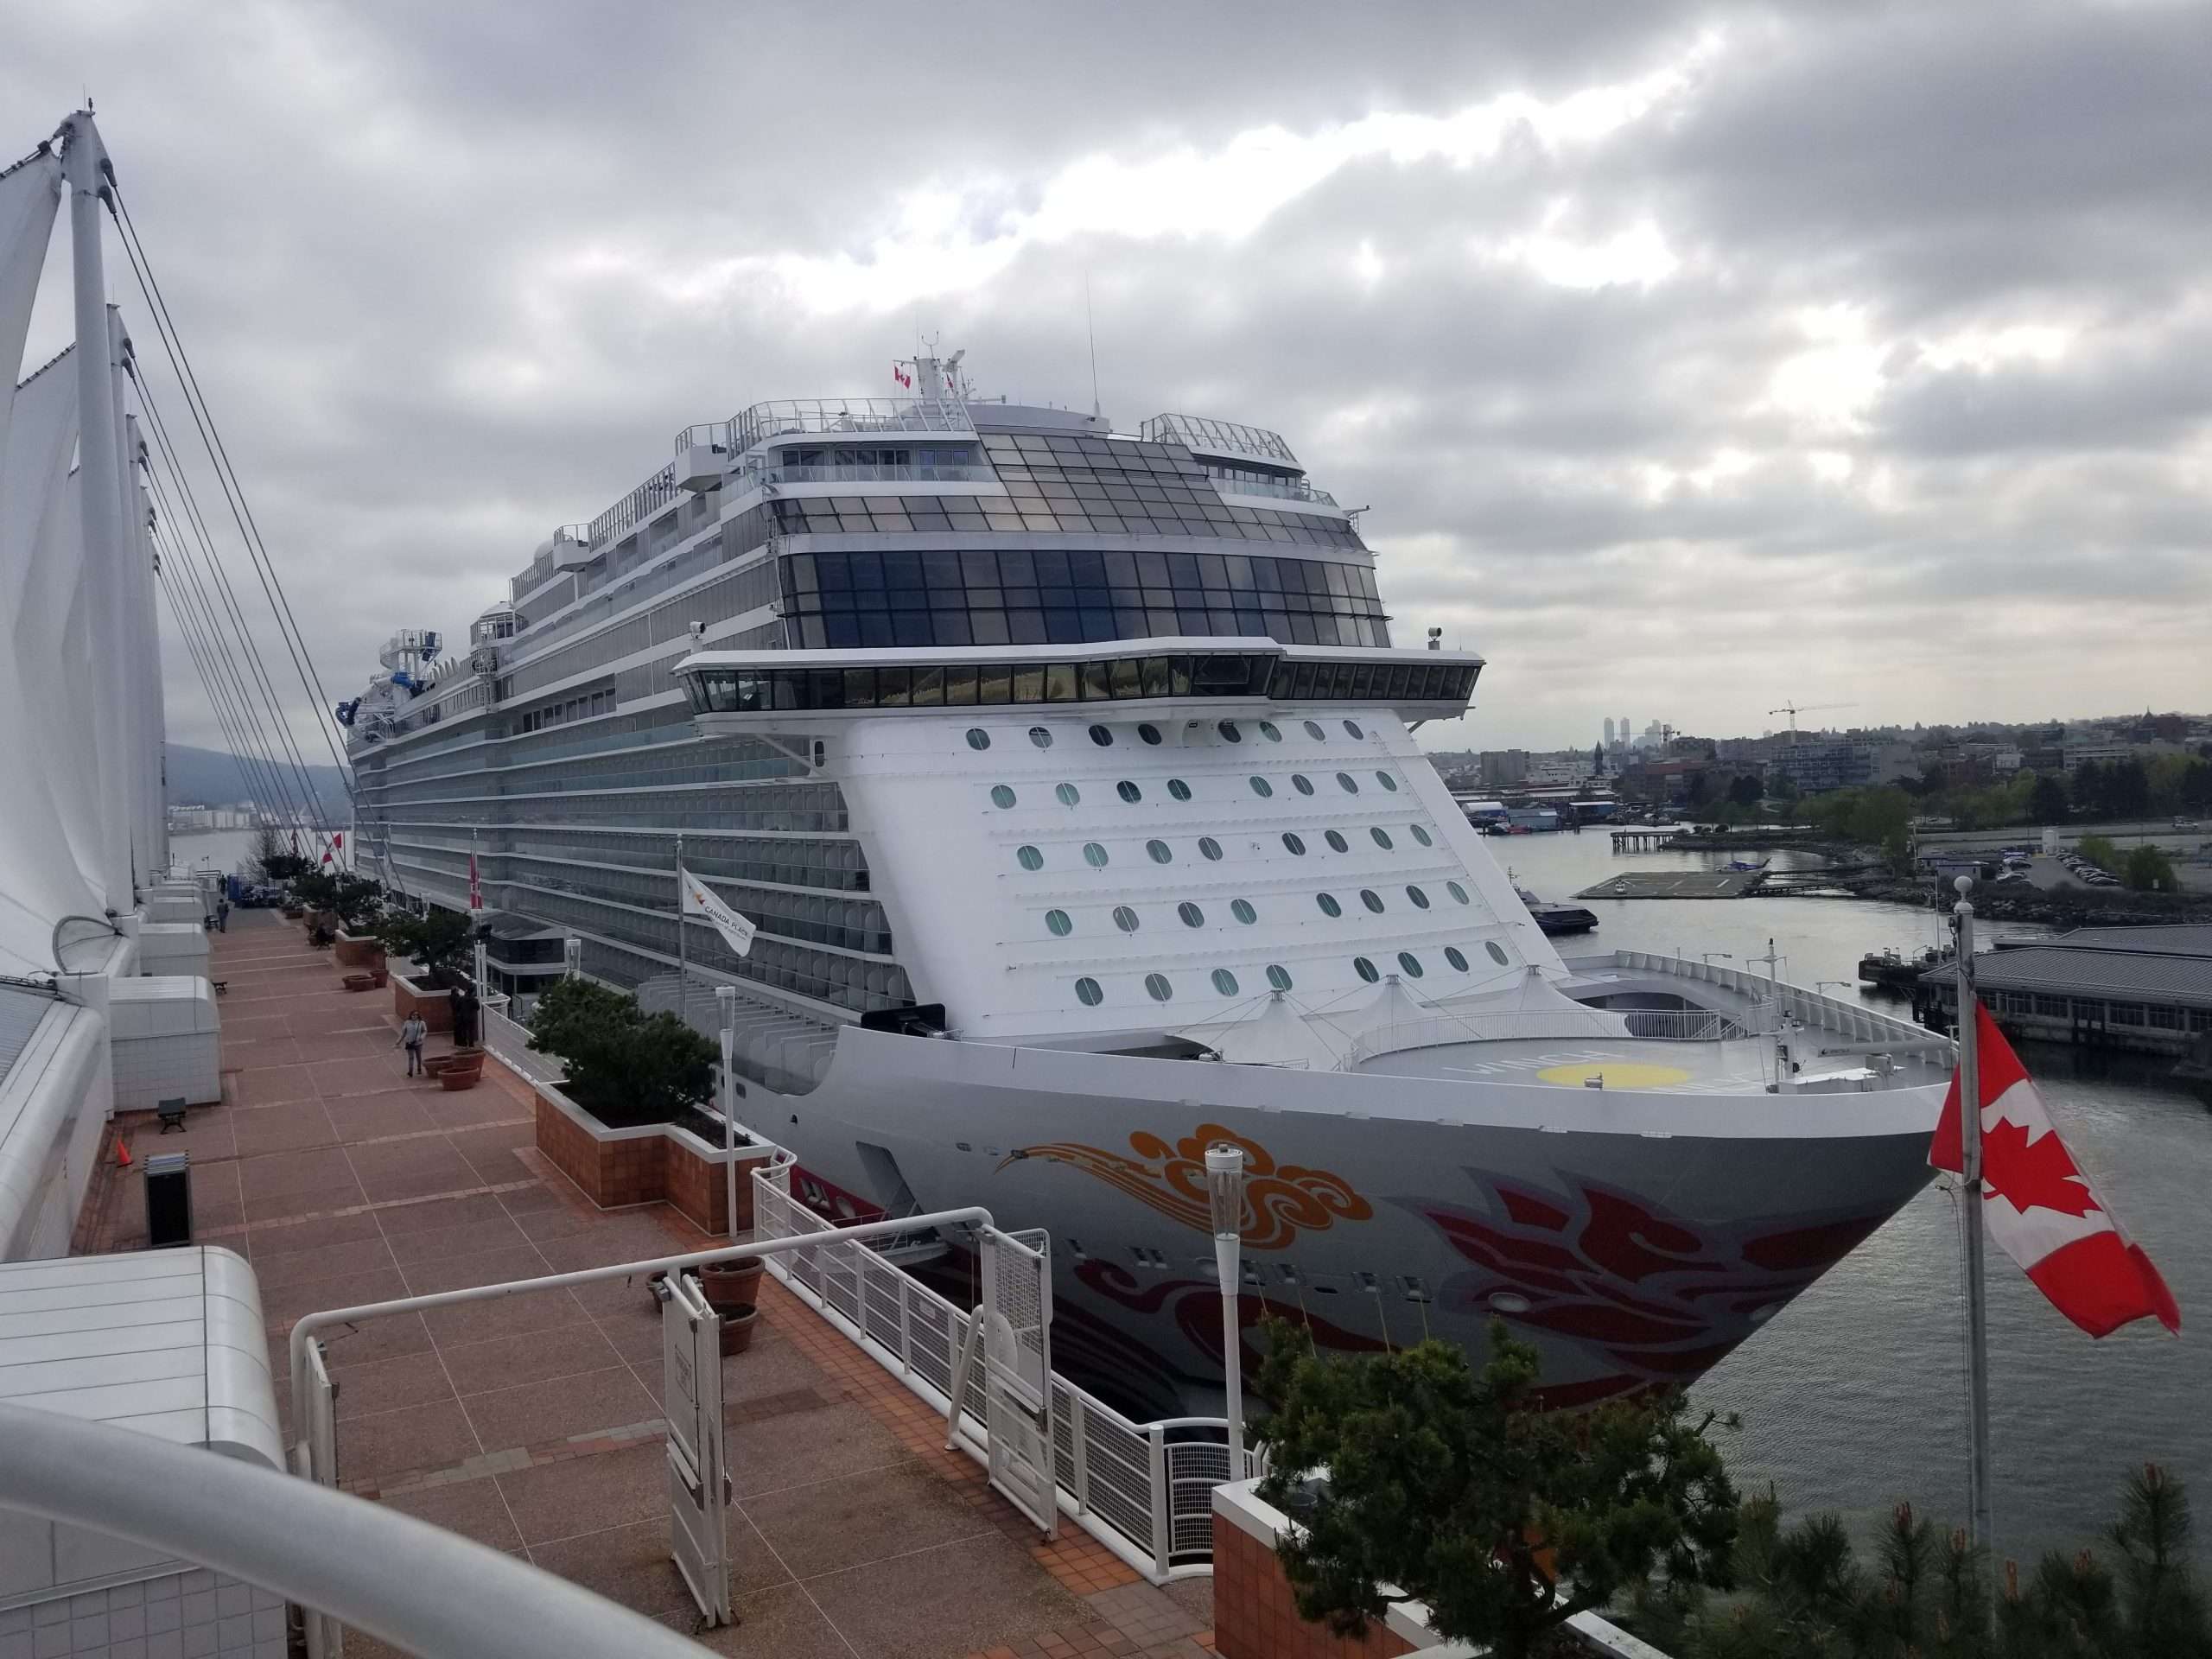 Norwegian Joy Cruise Review by mgribov